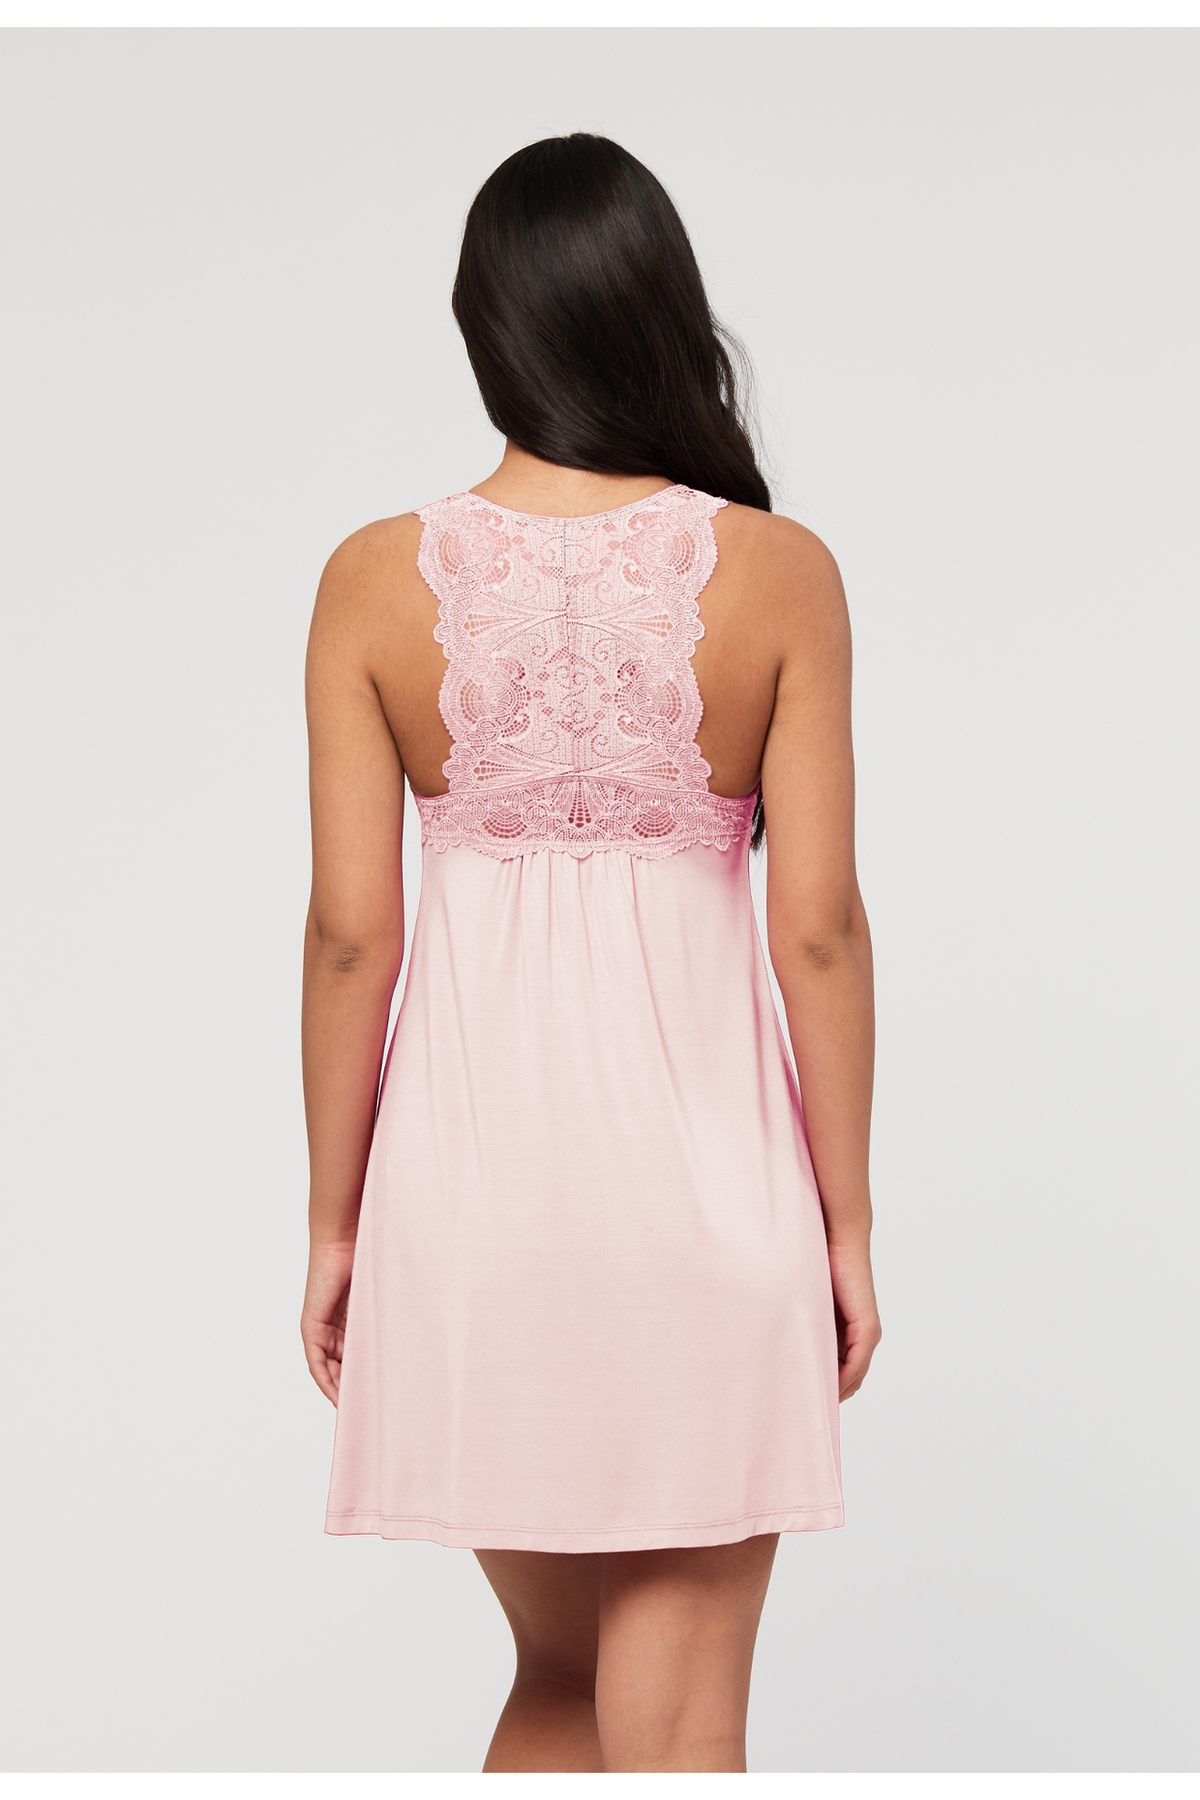 Fleur't Iconic Chemise - Style 637, back, peonies